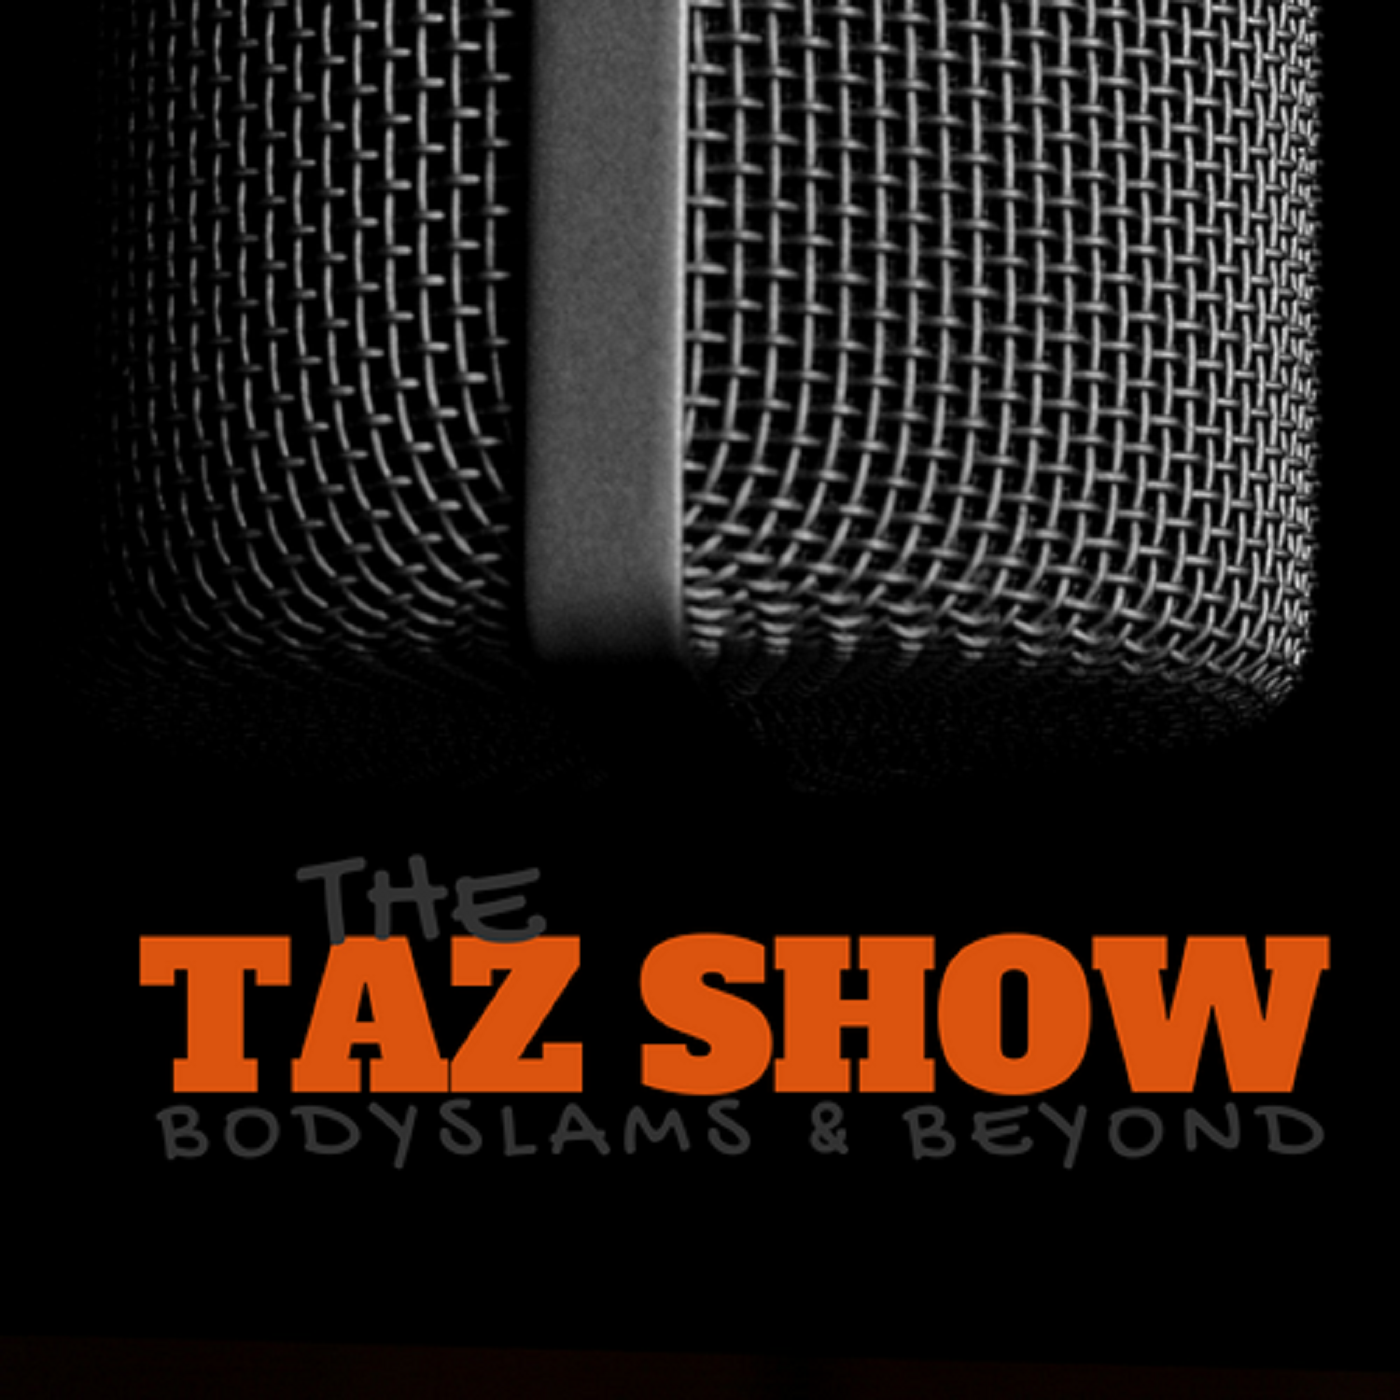 The Second Taz Show of 2016!